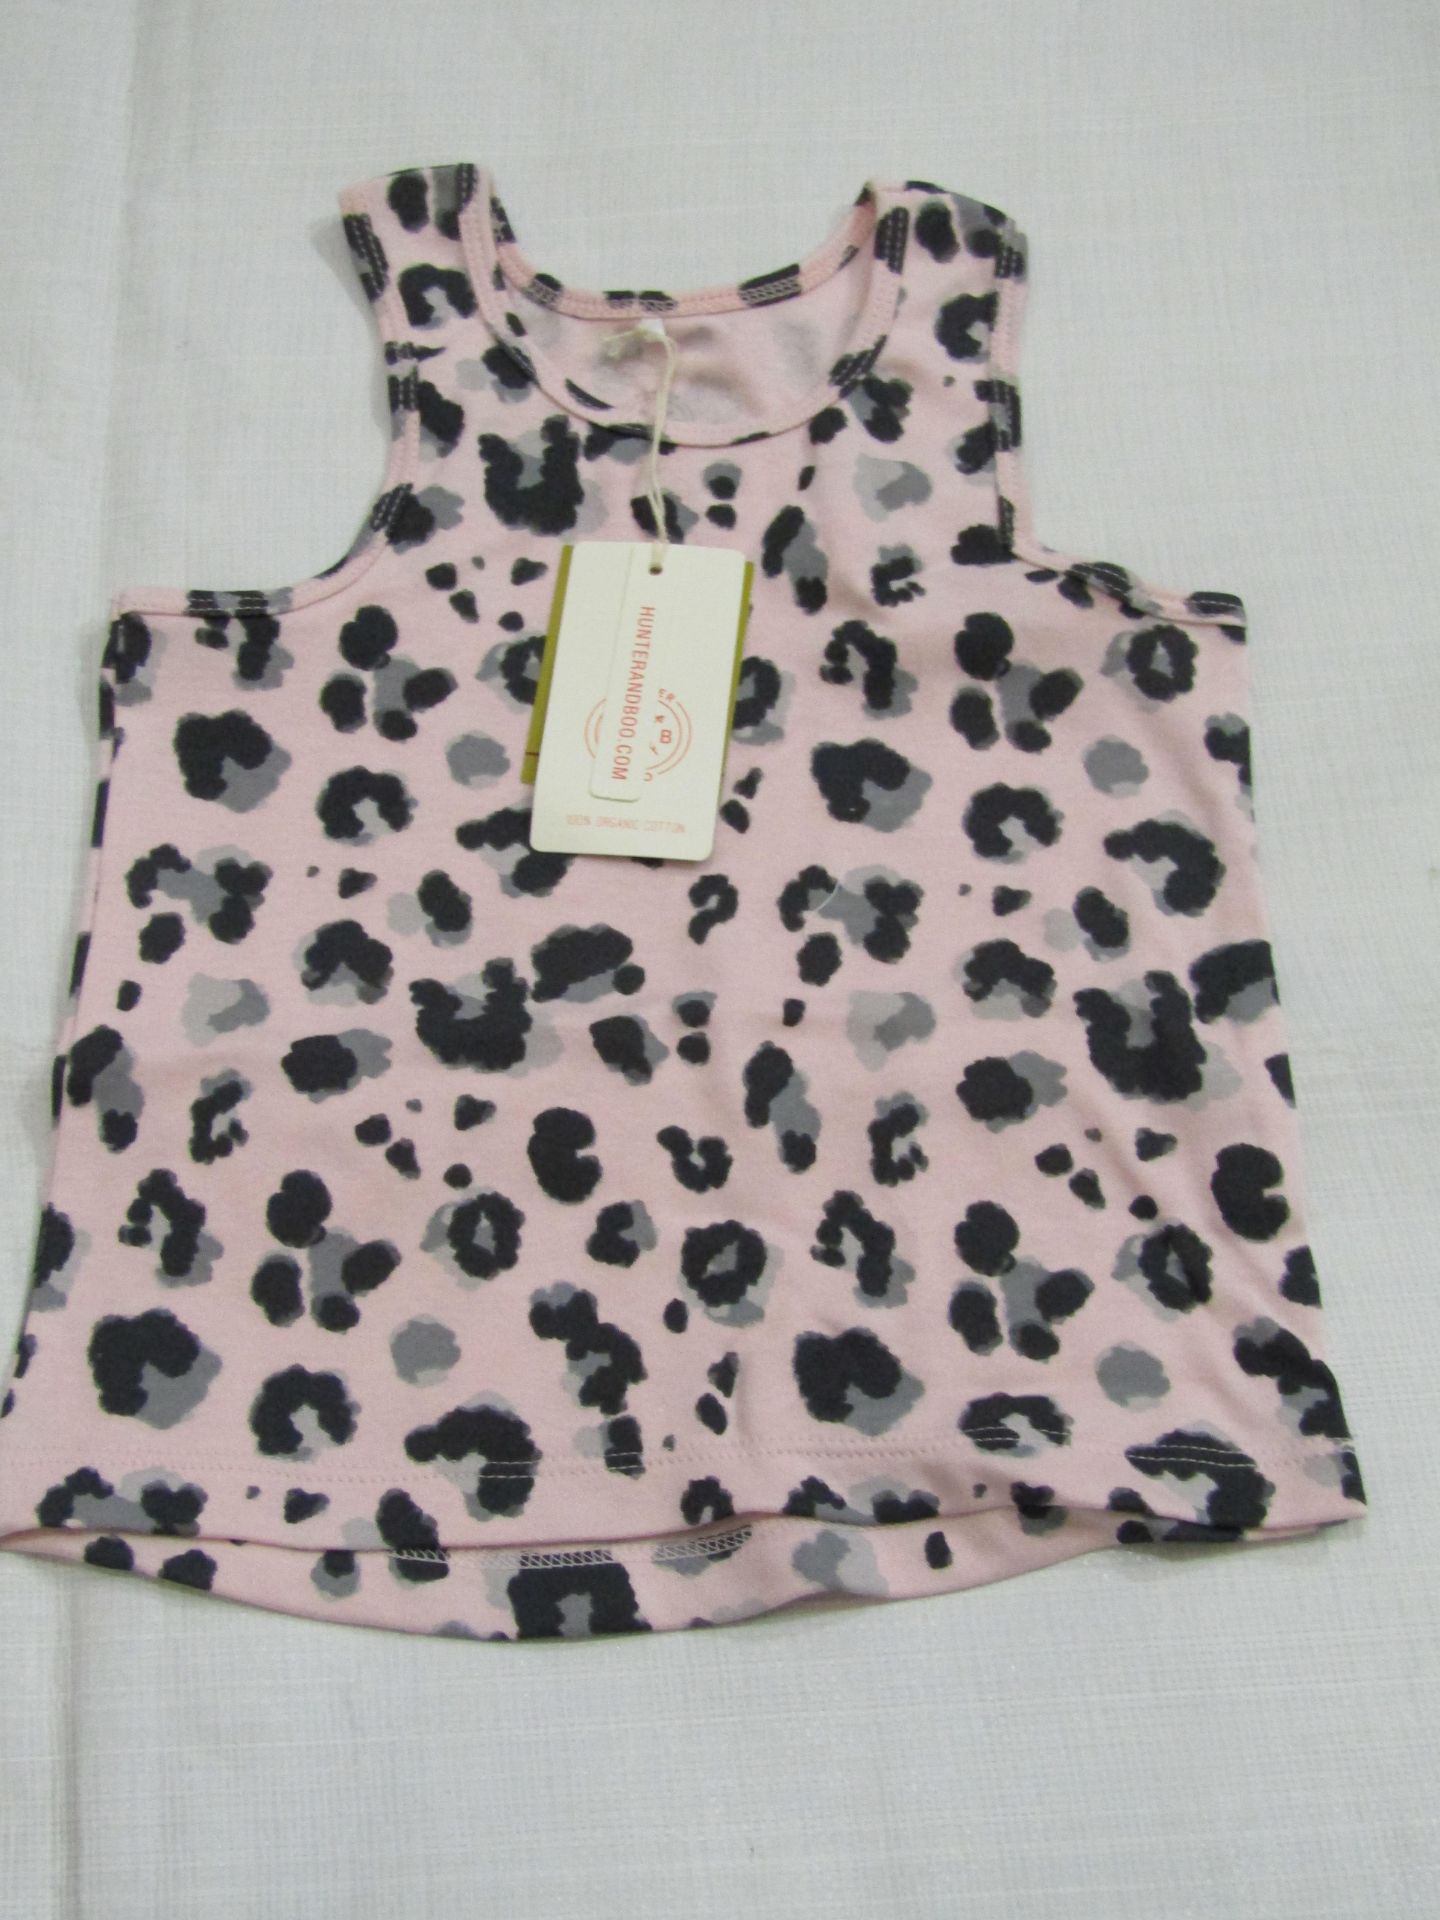 2 X Hunter & Boo Yala Pink Vests Aged 3-4 yrs New & Packaged RRP £13 Each